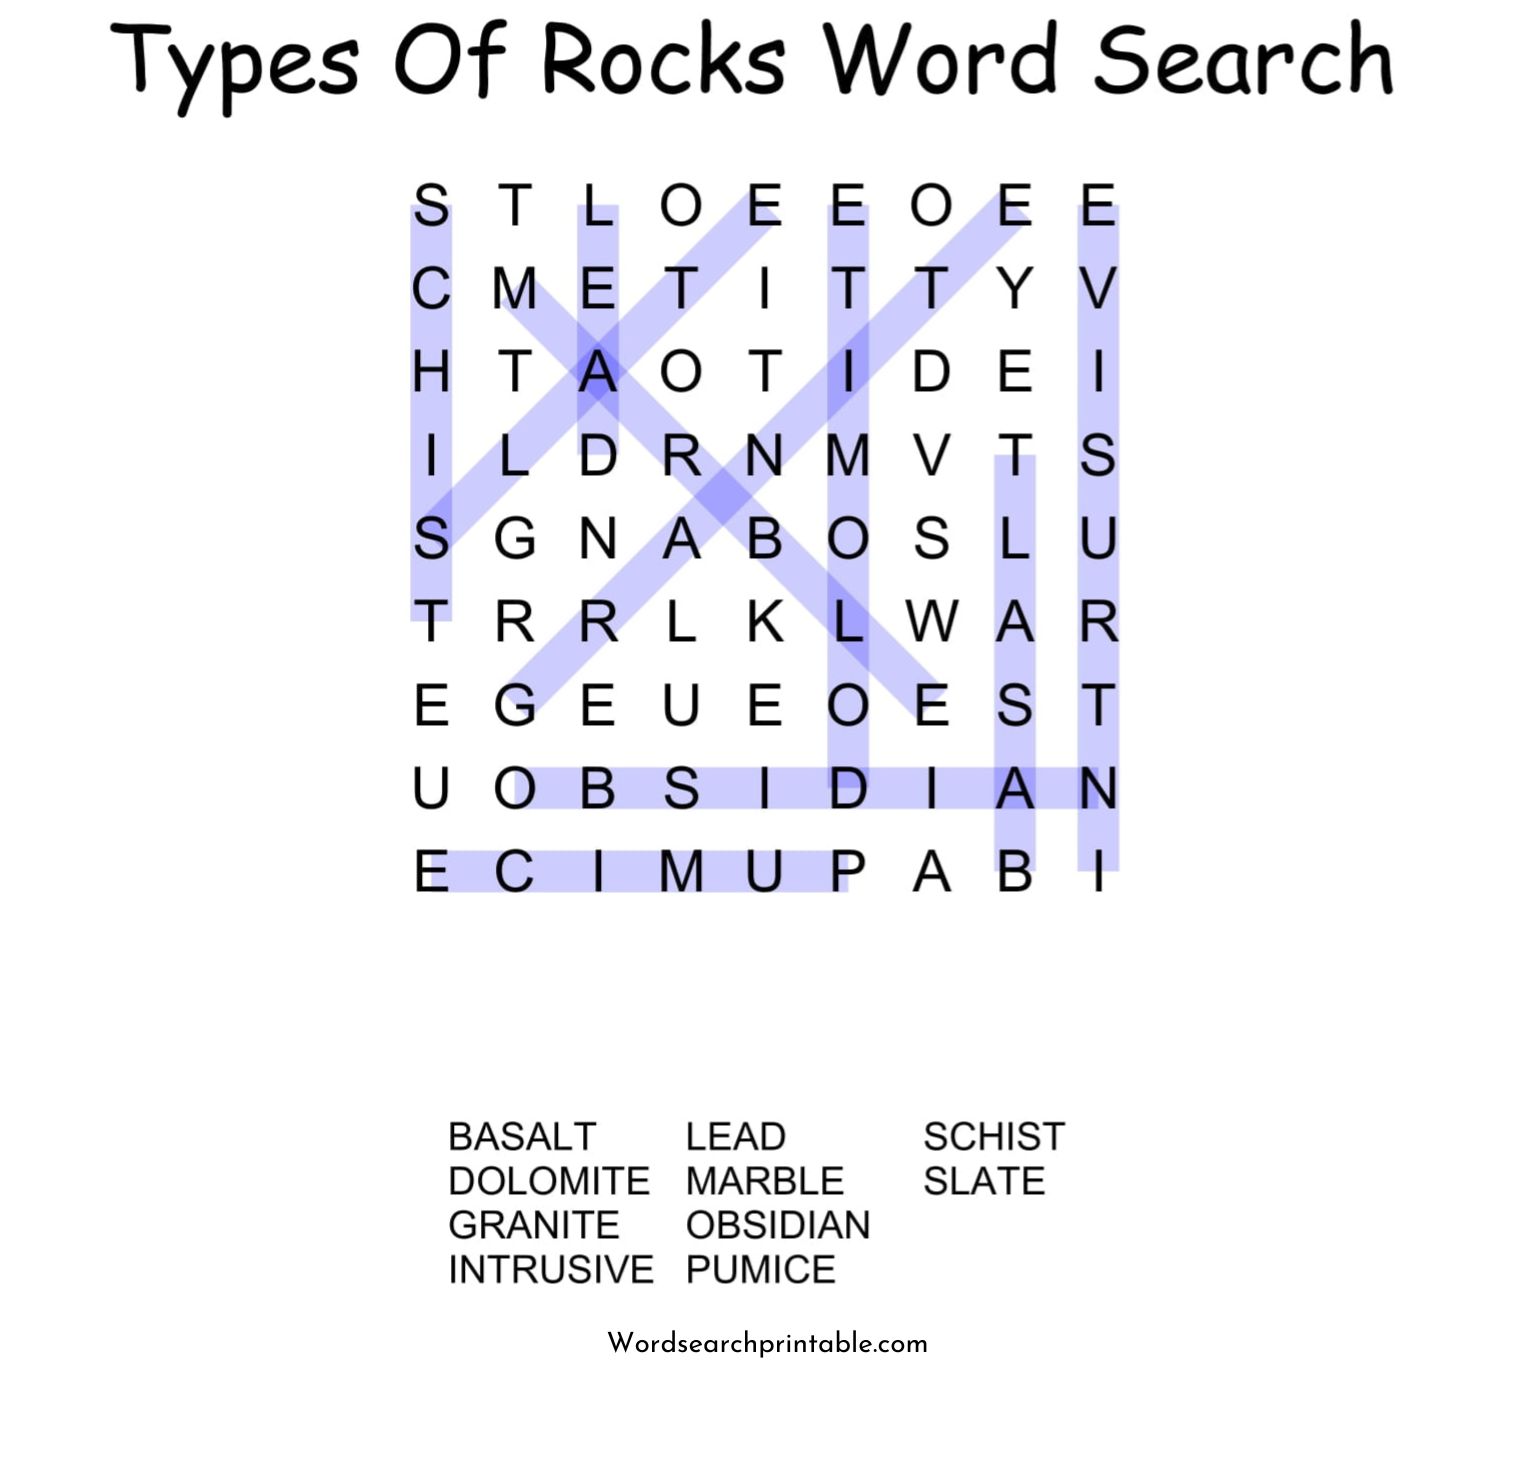 types of rocks word search puzzle solution